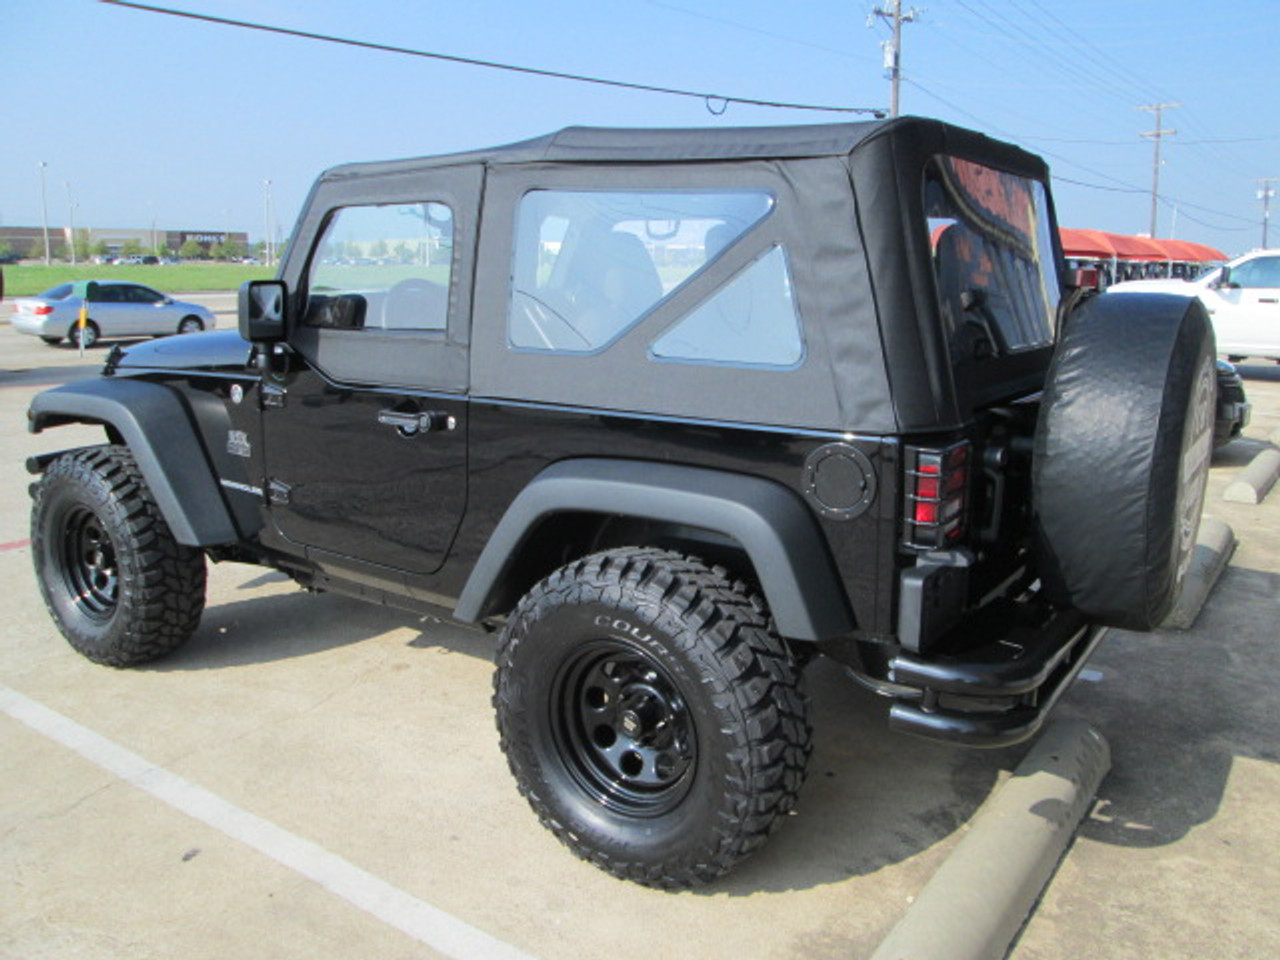 SOLD 2015 Black Mountain Conversions 2DR Jeep Wrangler Stock# 517632